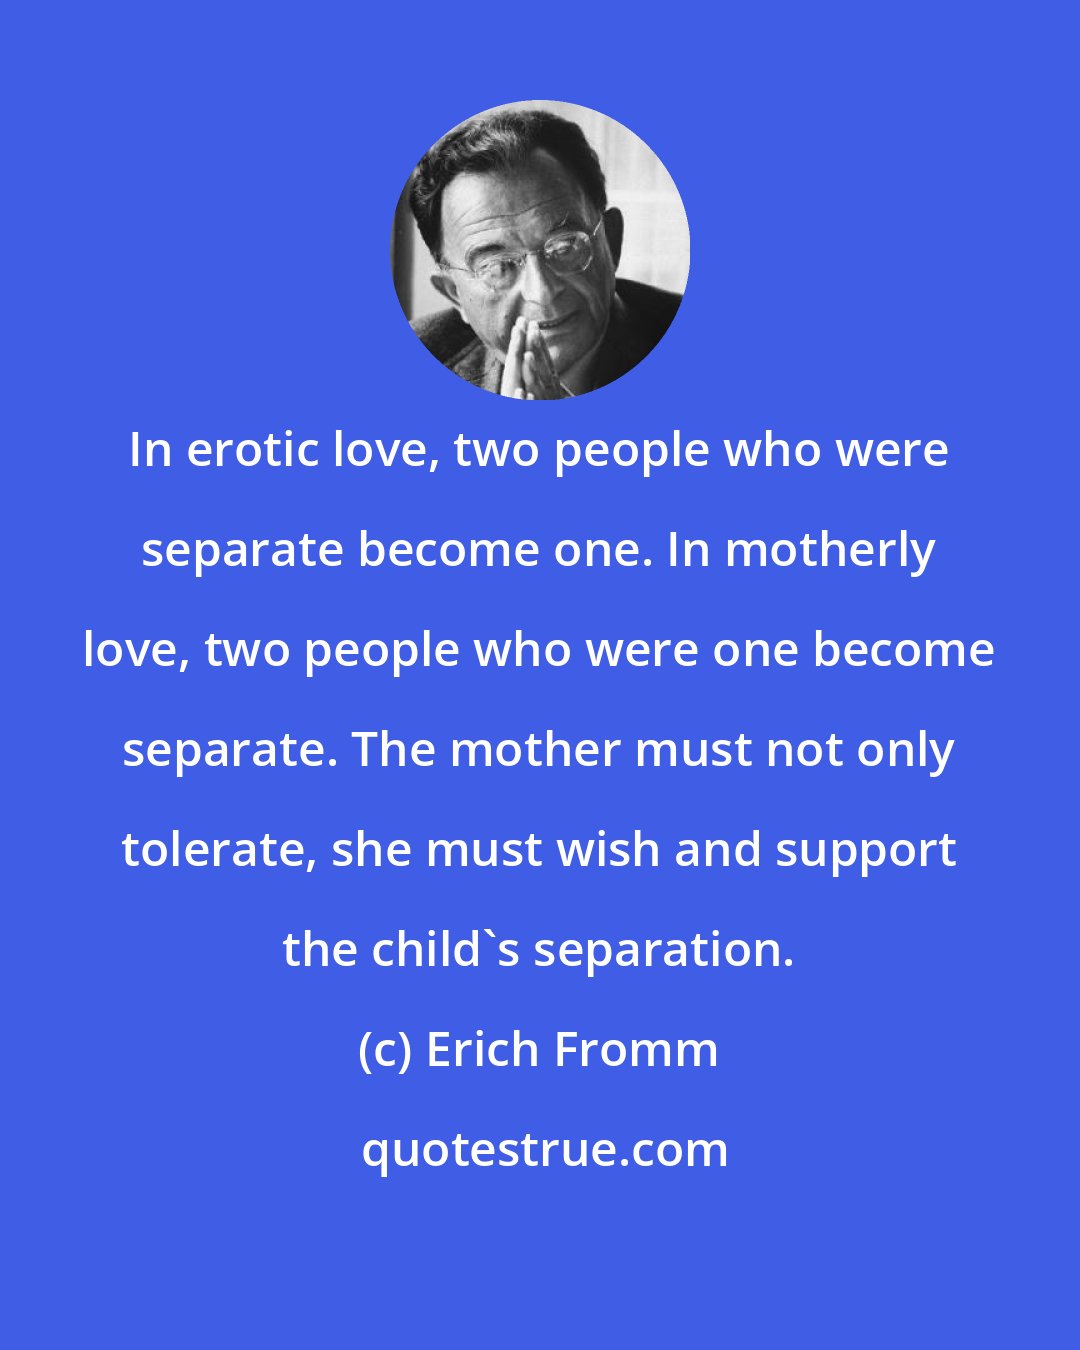 Erich Fromm: In erotic love, two people who were separate become one. In motherly love, two people who were one become separate. The mother must not only tolerate, she must wish and support the child's separation.